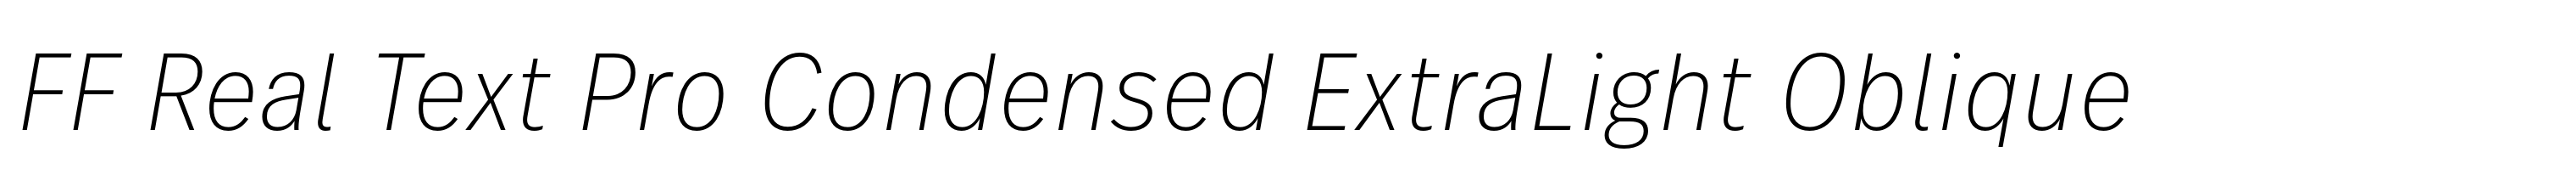 FF Real Text Pro Condensed ExtraLight Oblique